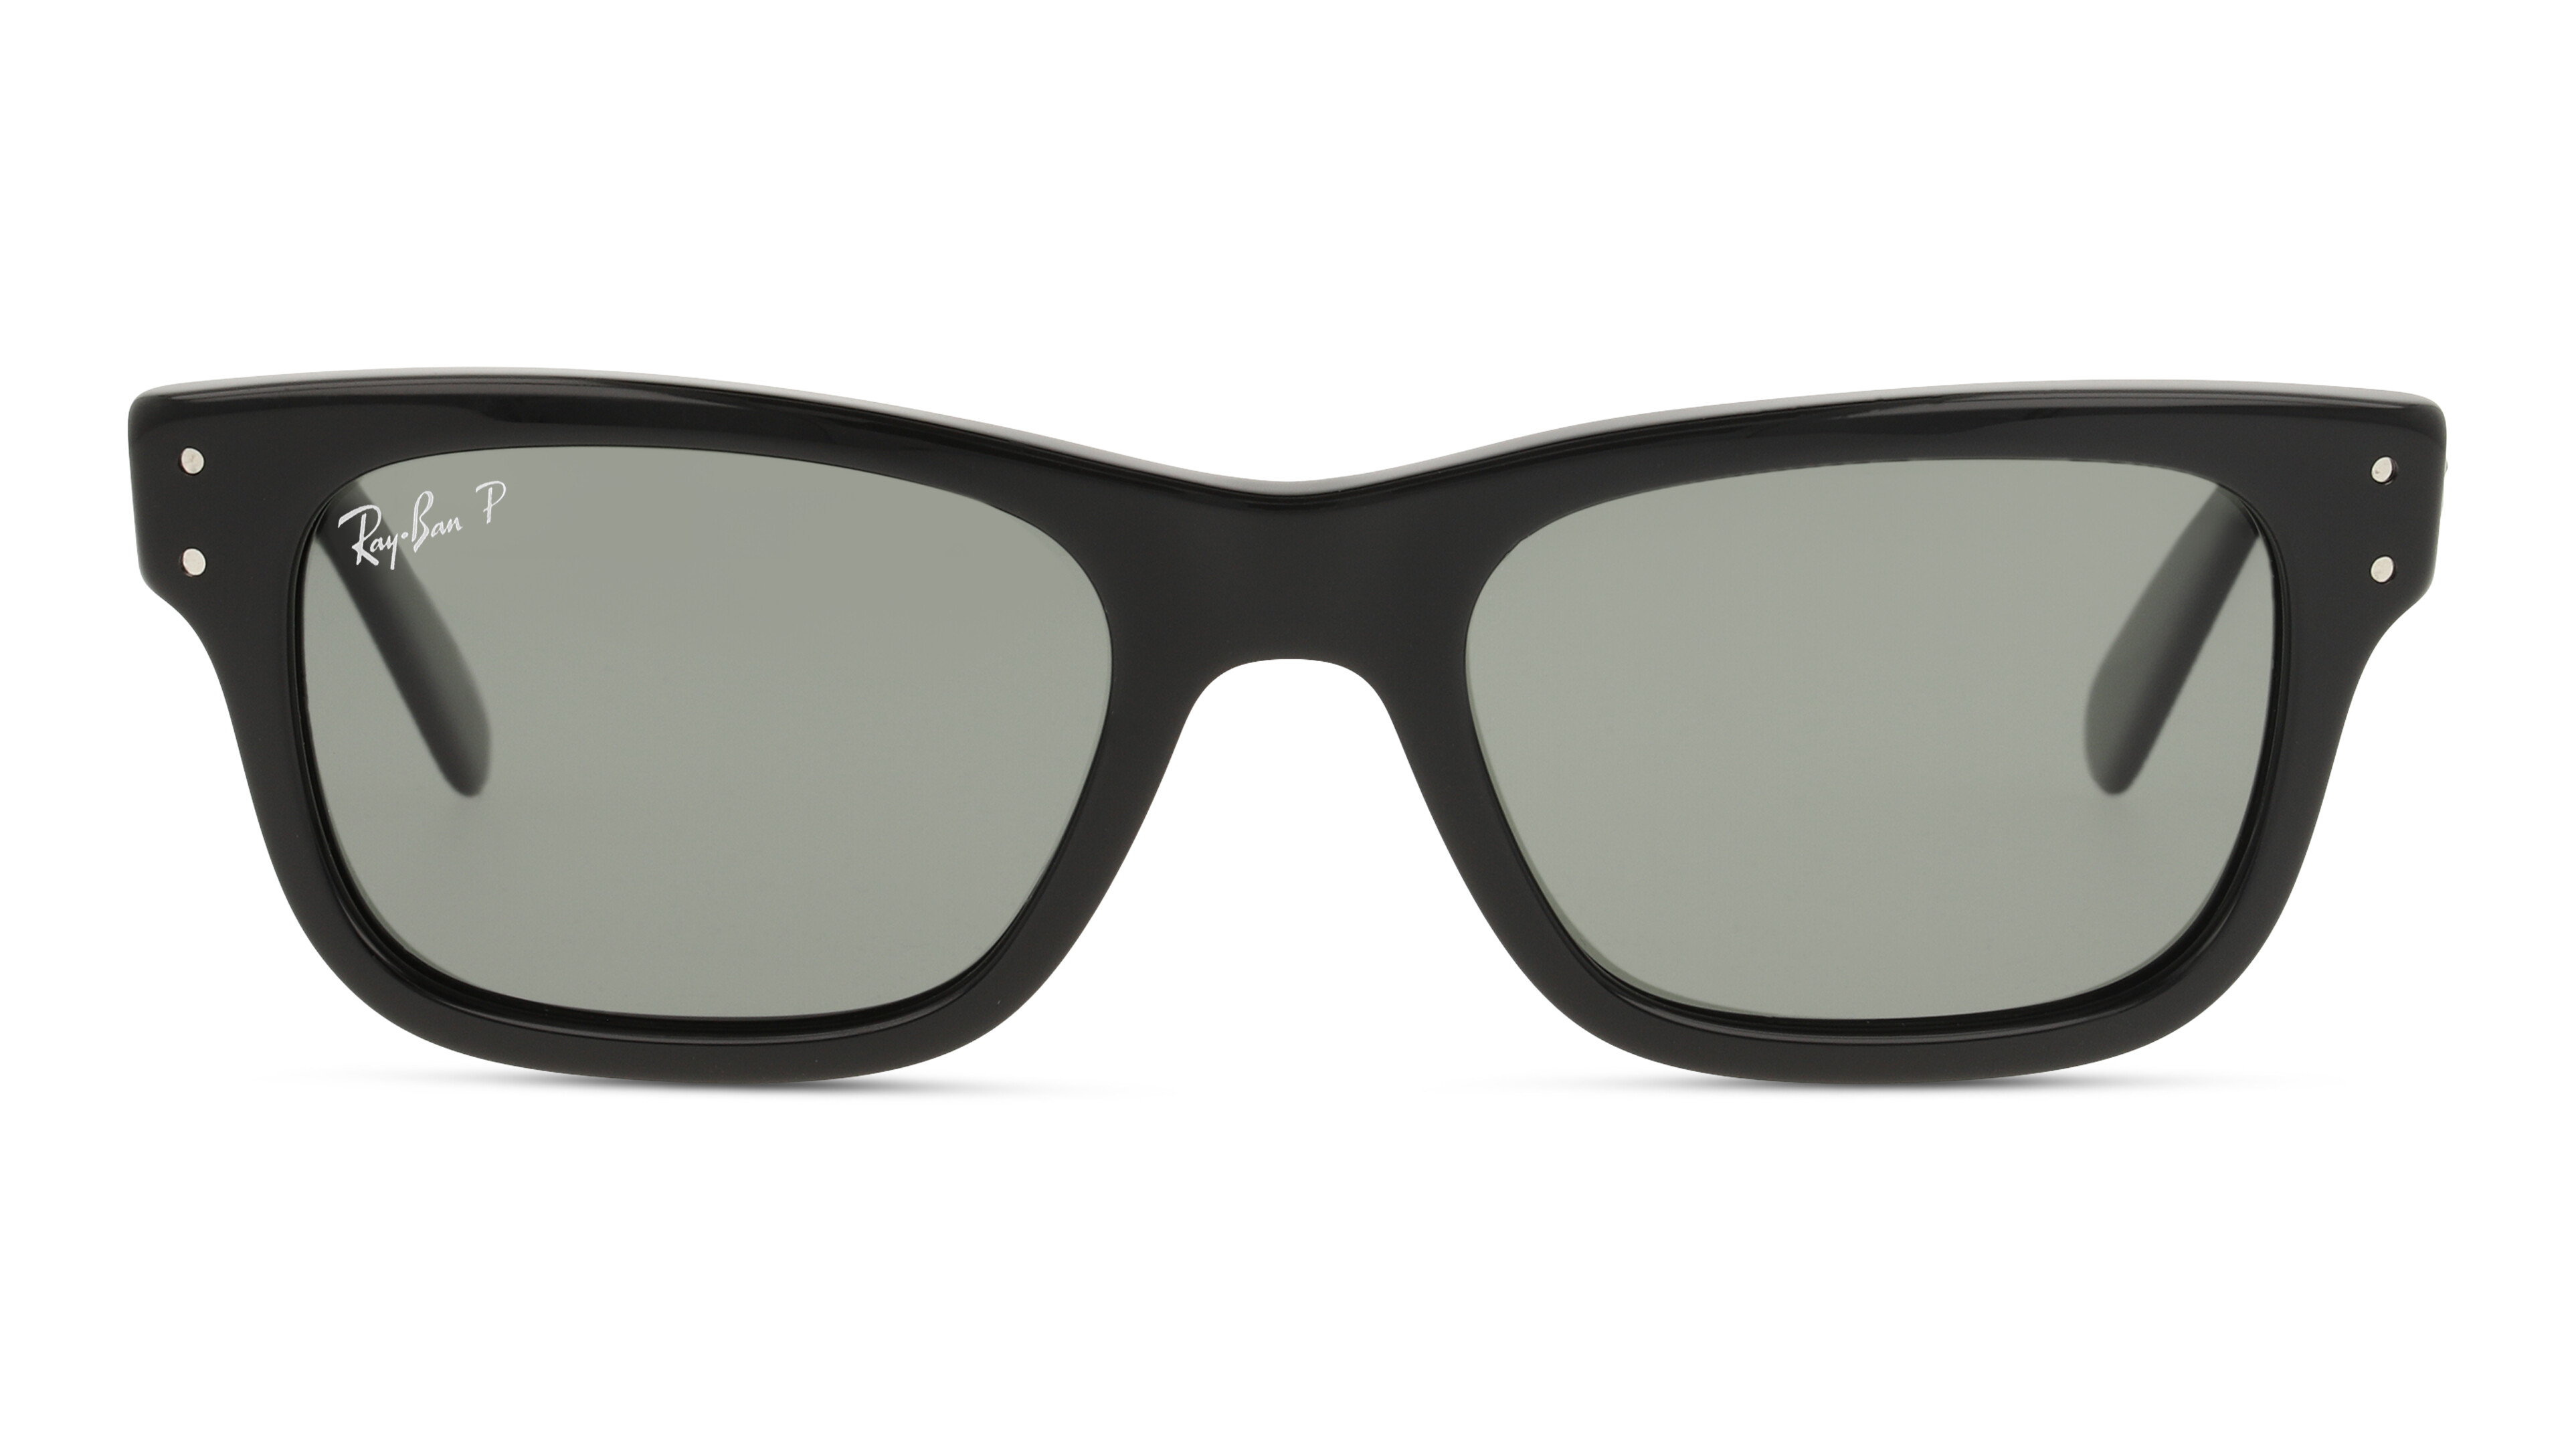 [products.image.front] Ray-Ban MR BURBANK 0RB2283 901/58 Sonnenbrille